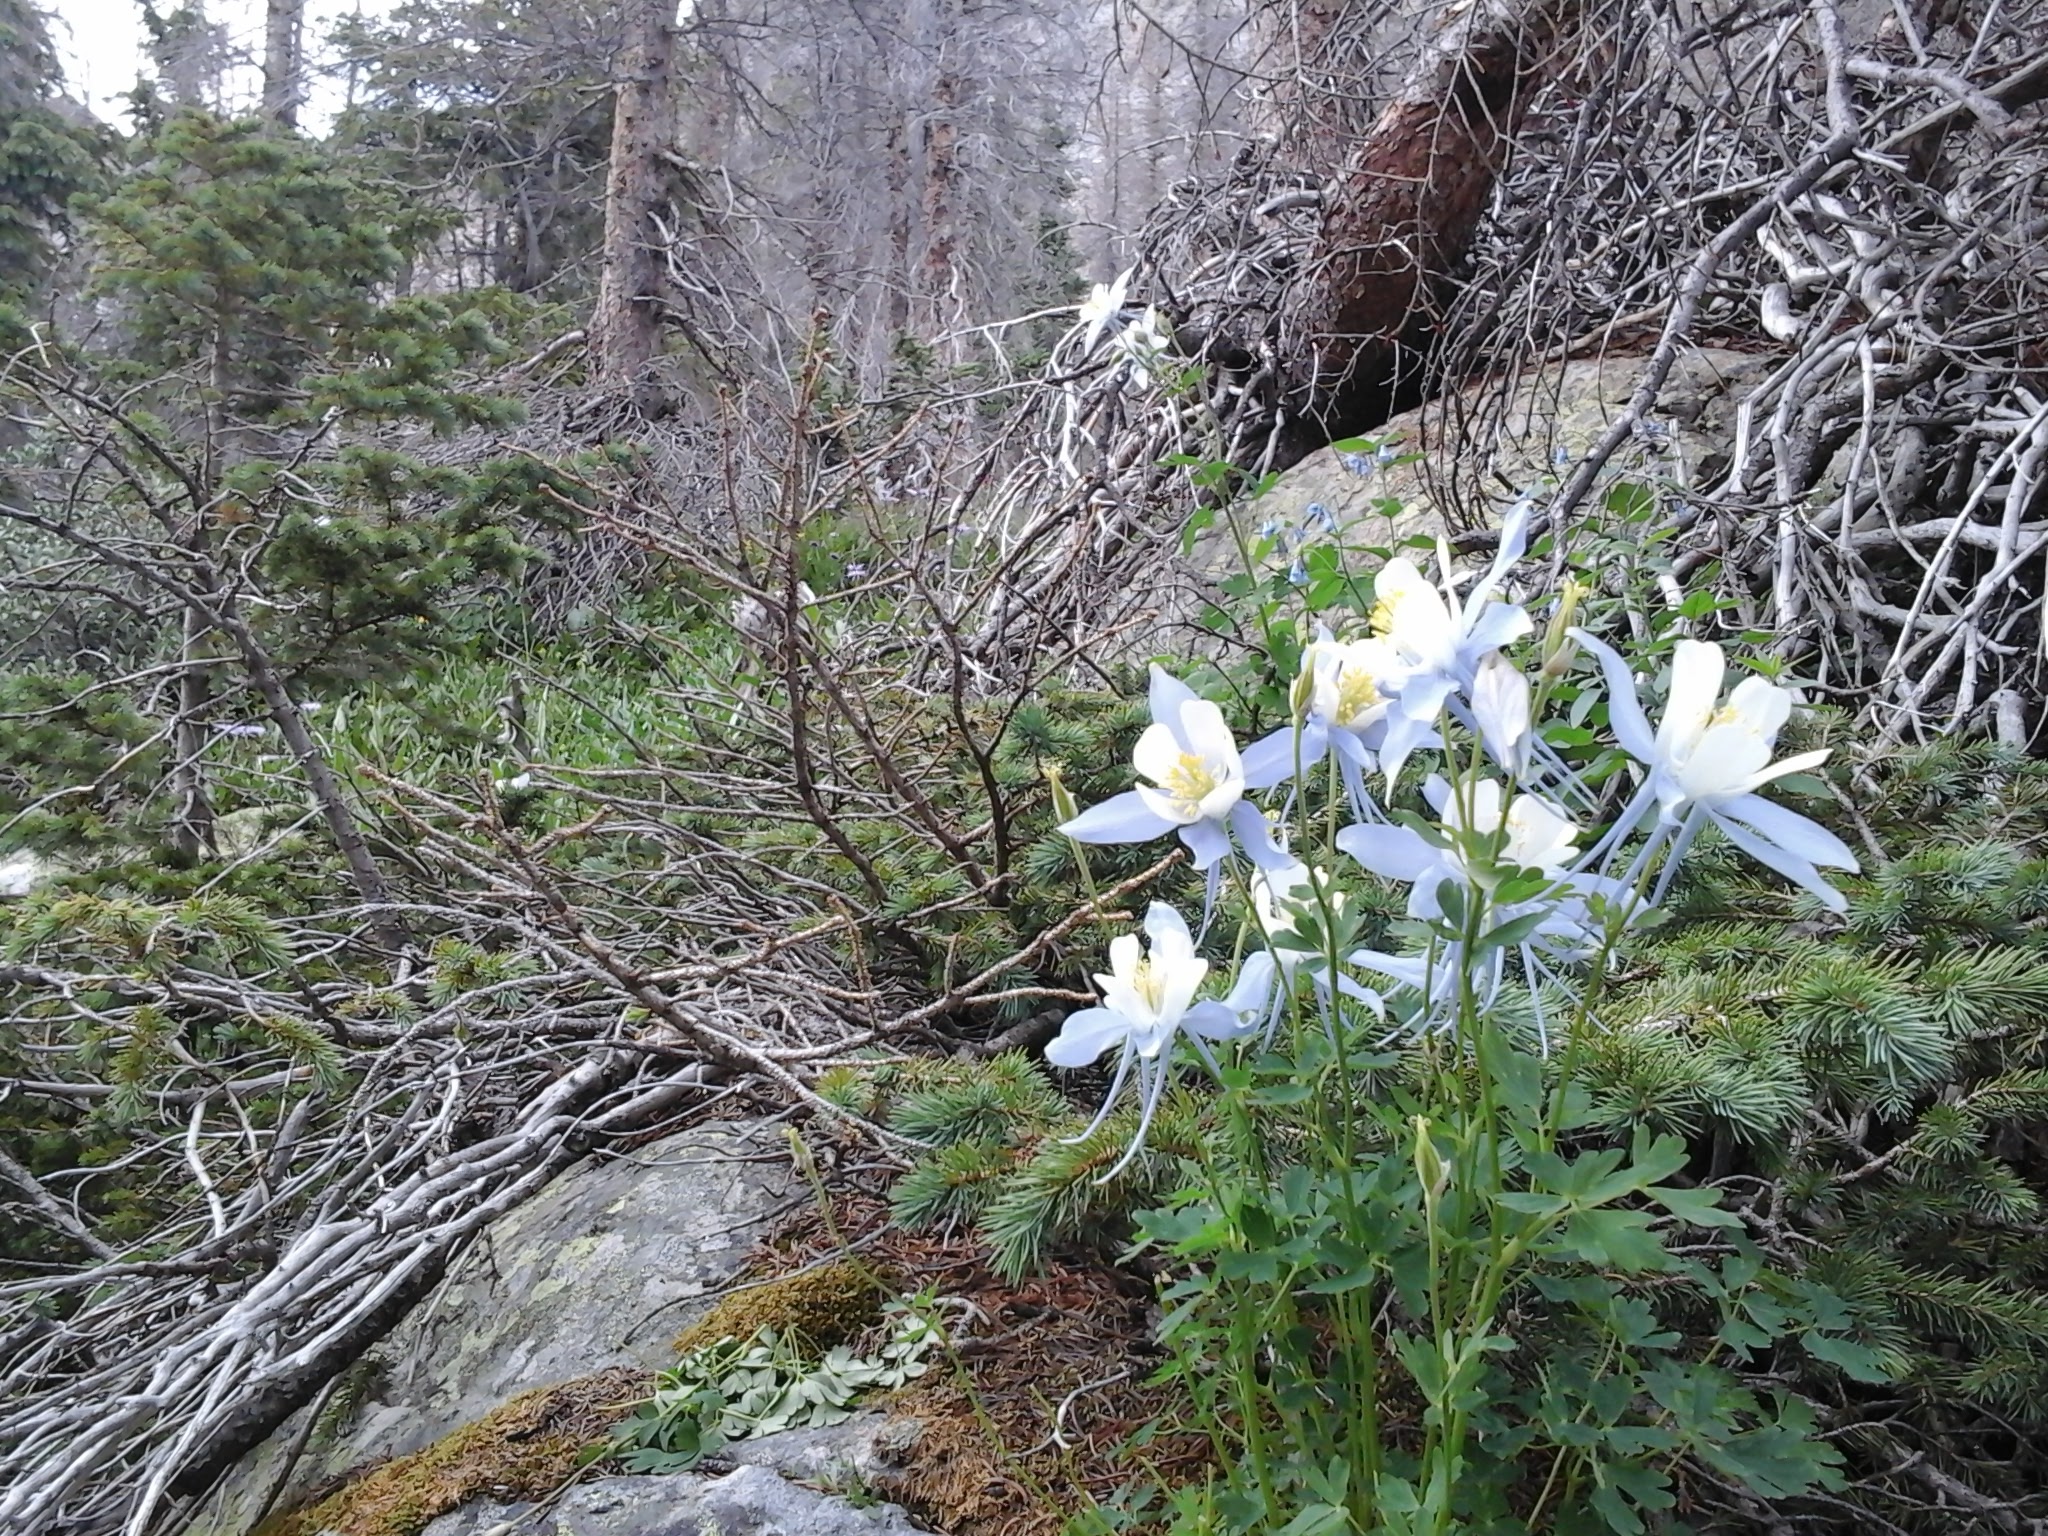 Purple and white Columbines in the forest.